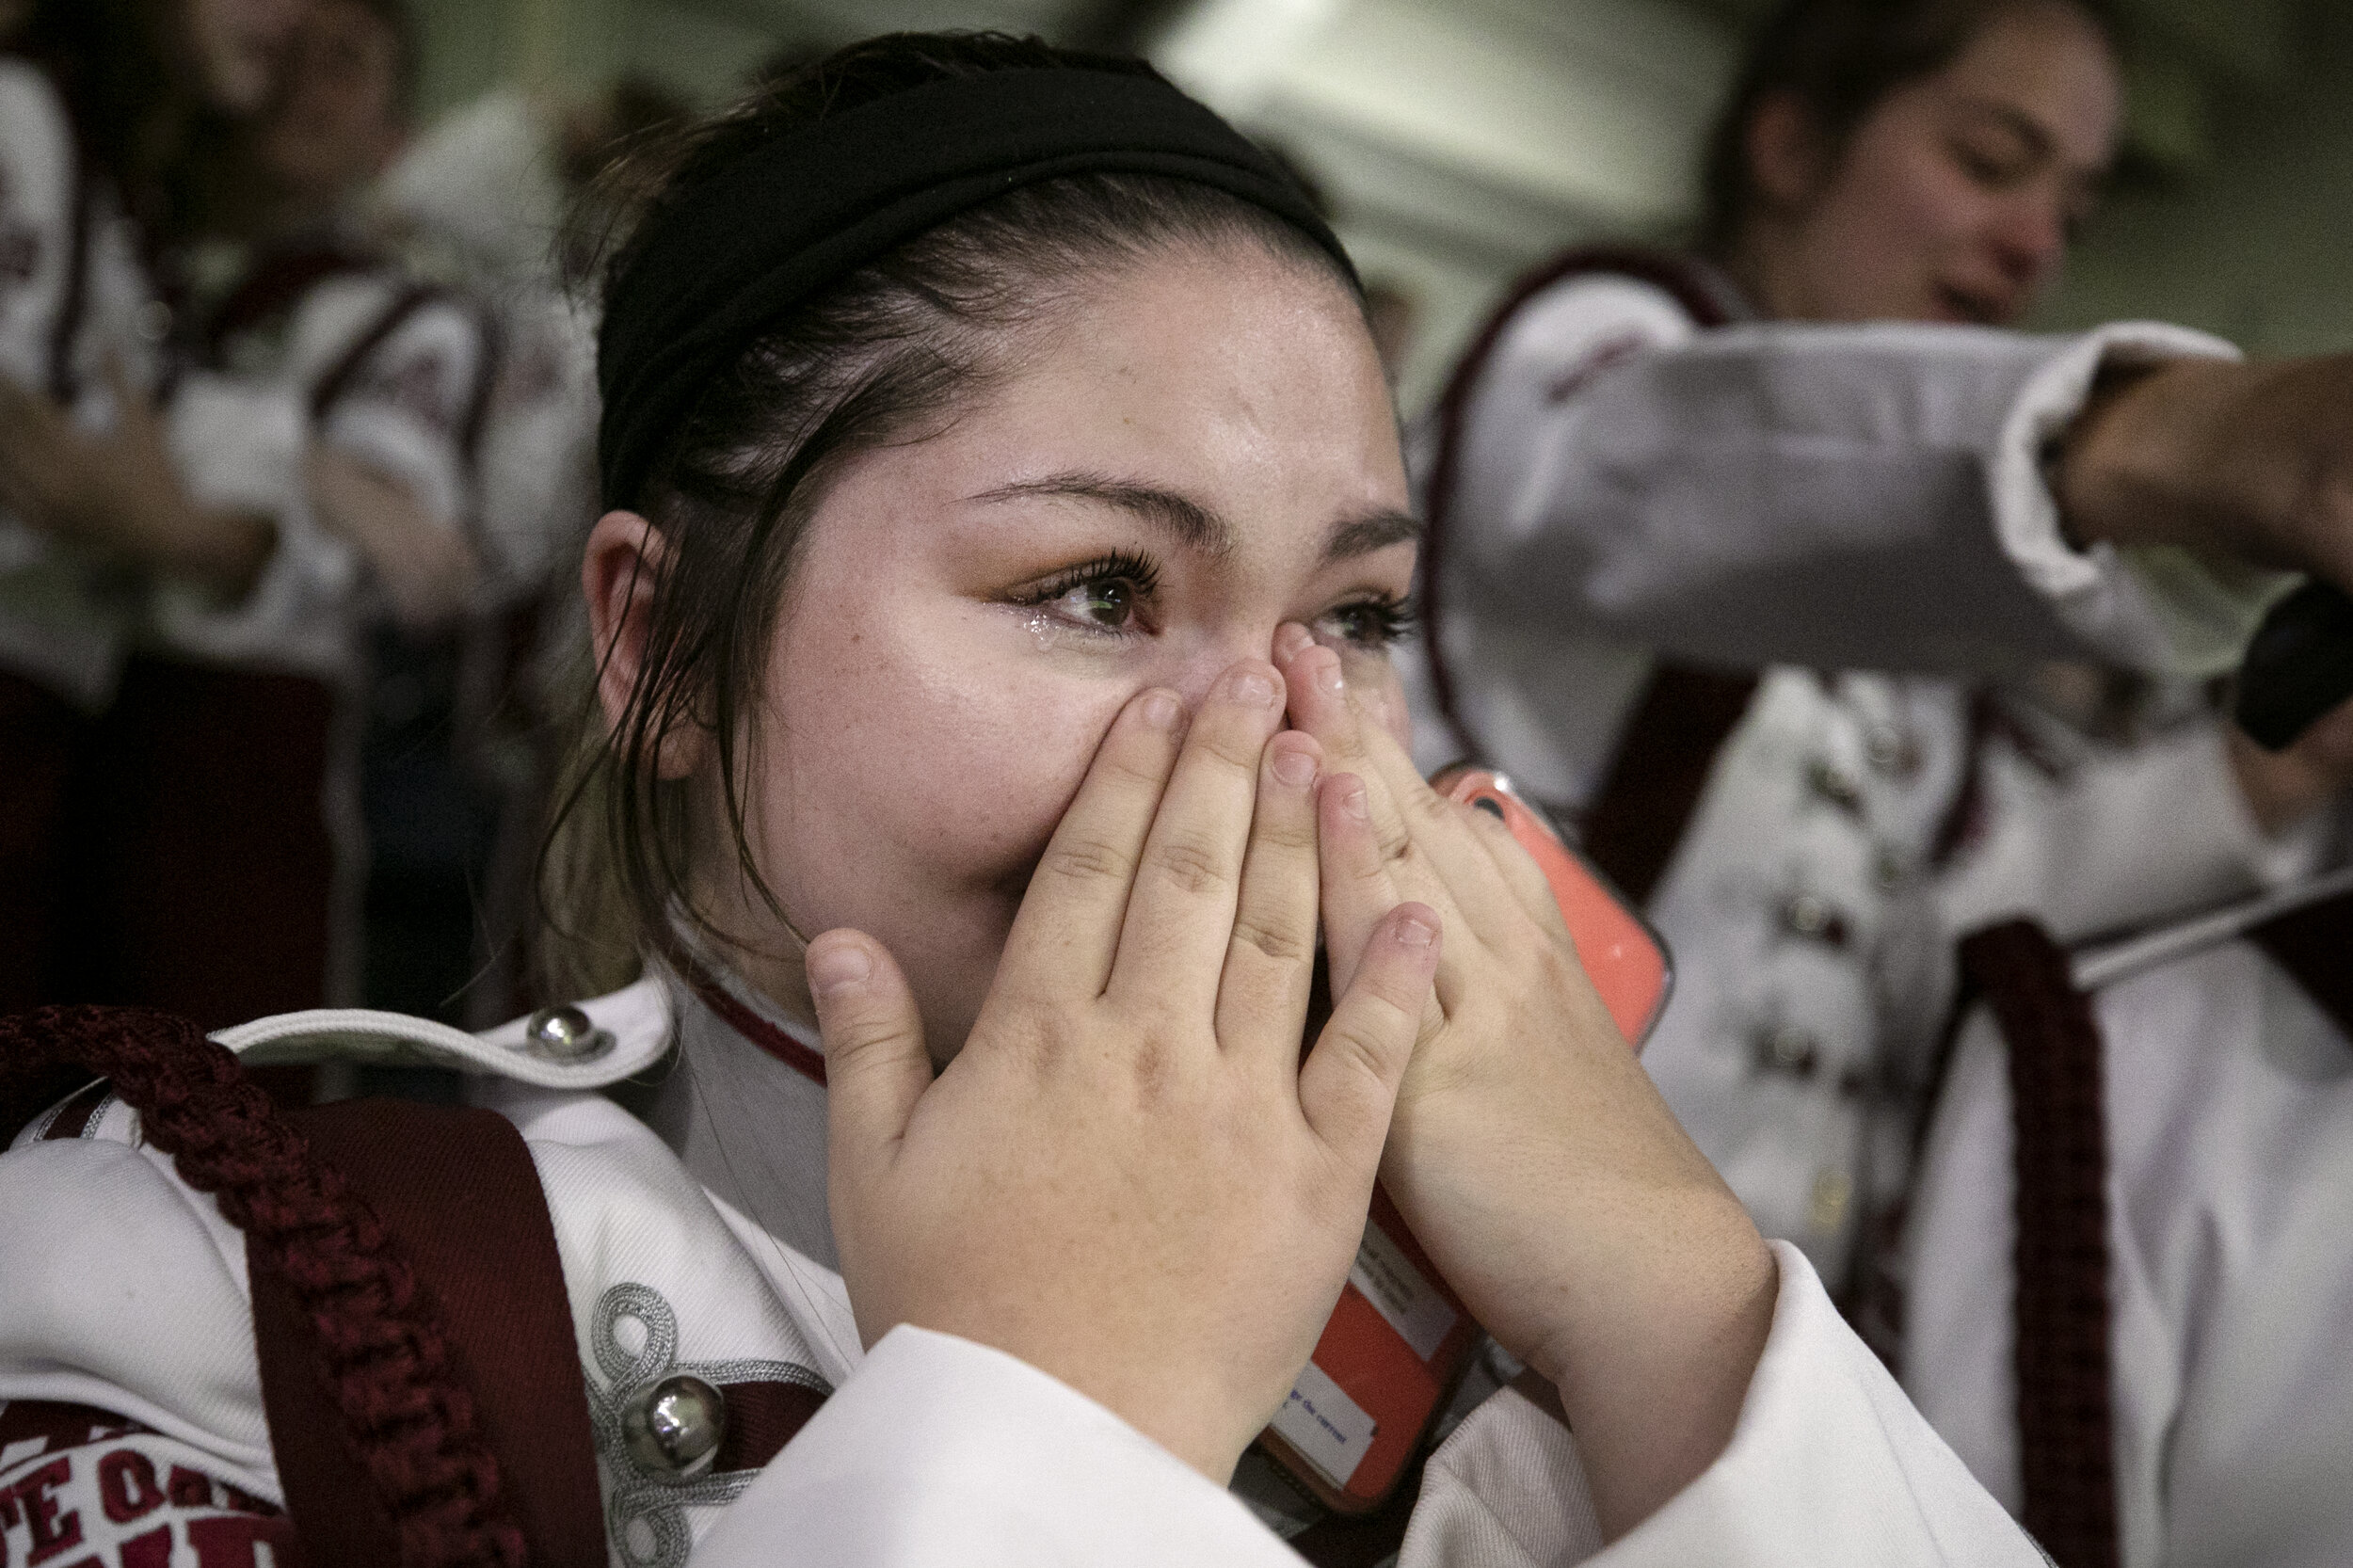  Asia Haddack cries when the White Oak HS makes finals at the UIL State Marching Band competition.&nbsp; 